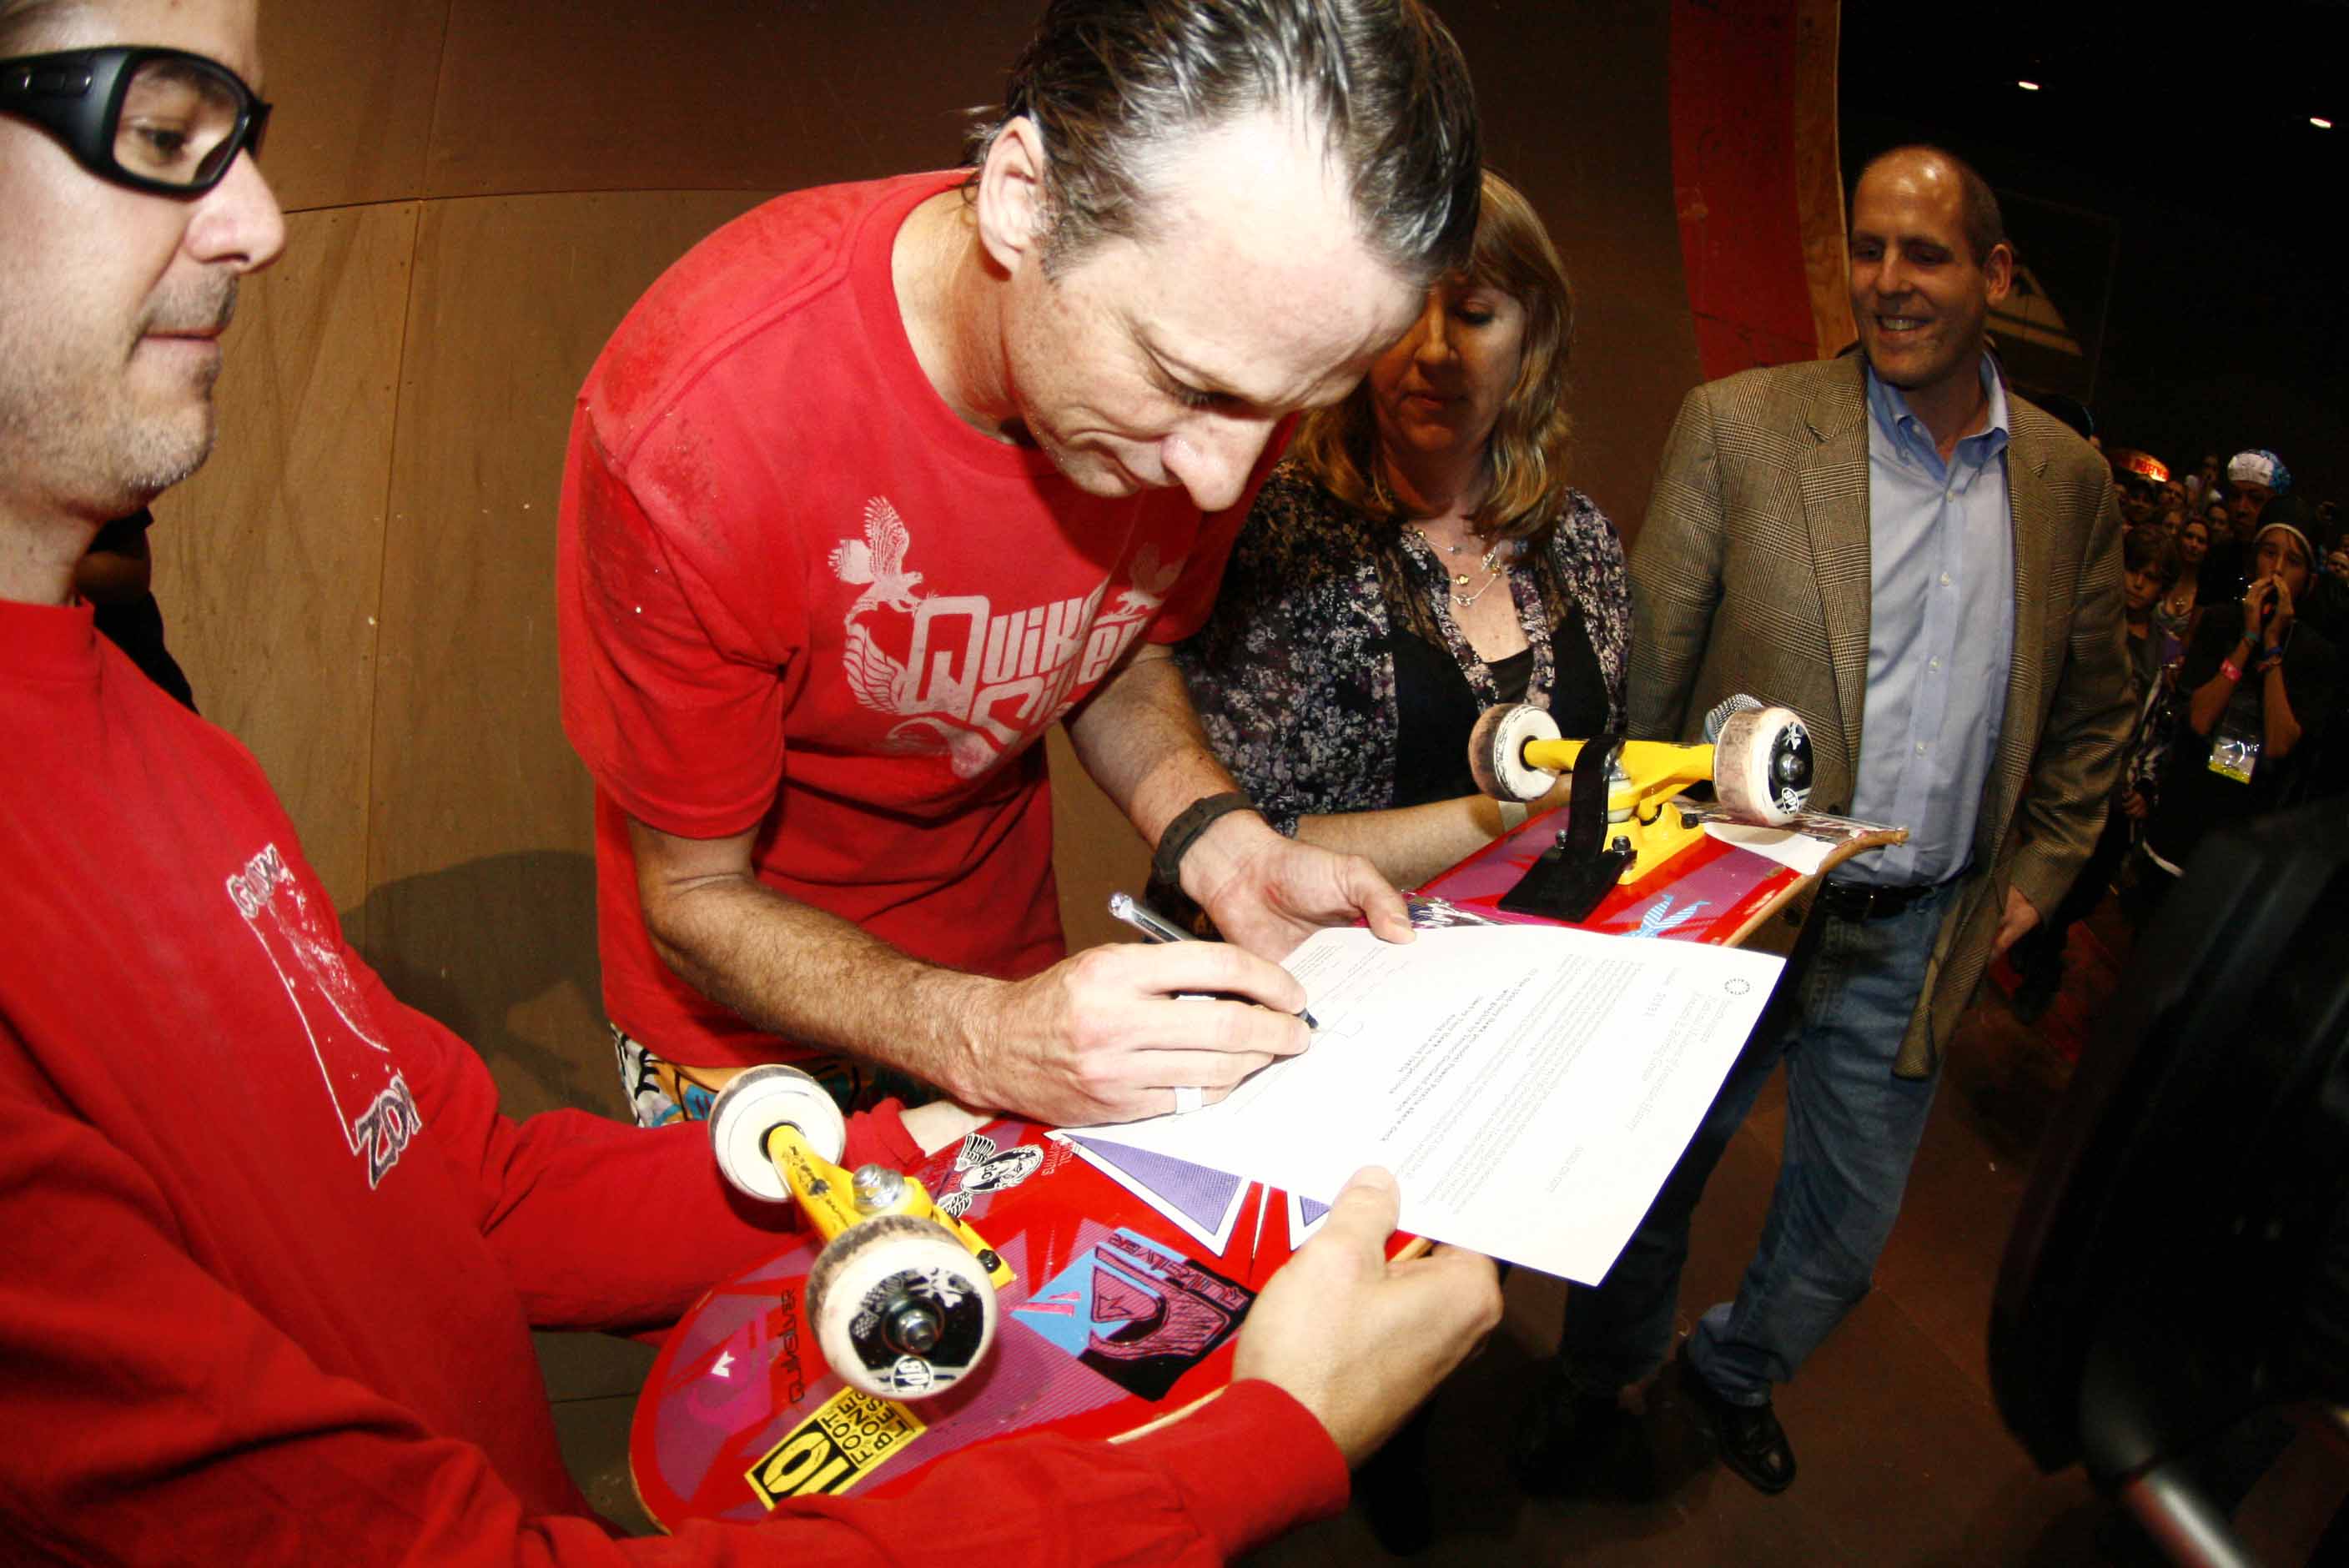 Tony Hawk signs deed of gift for his skatedeck in 2011. Curators are standing by.